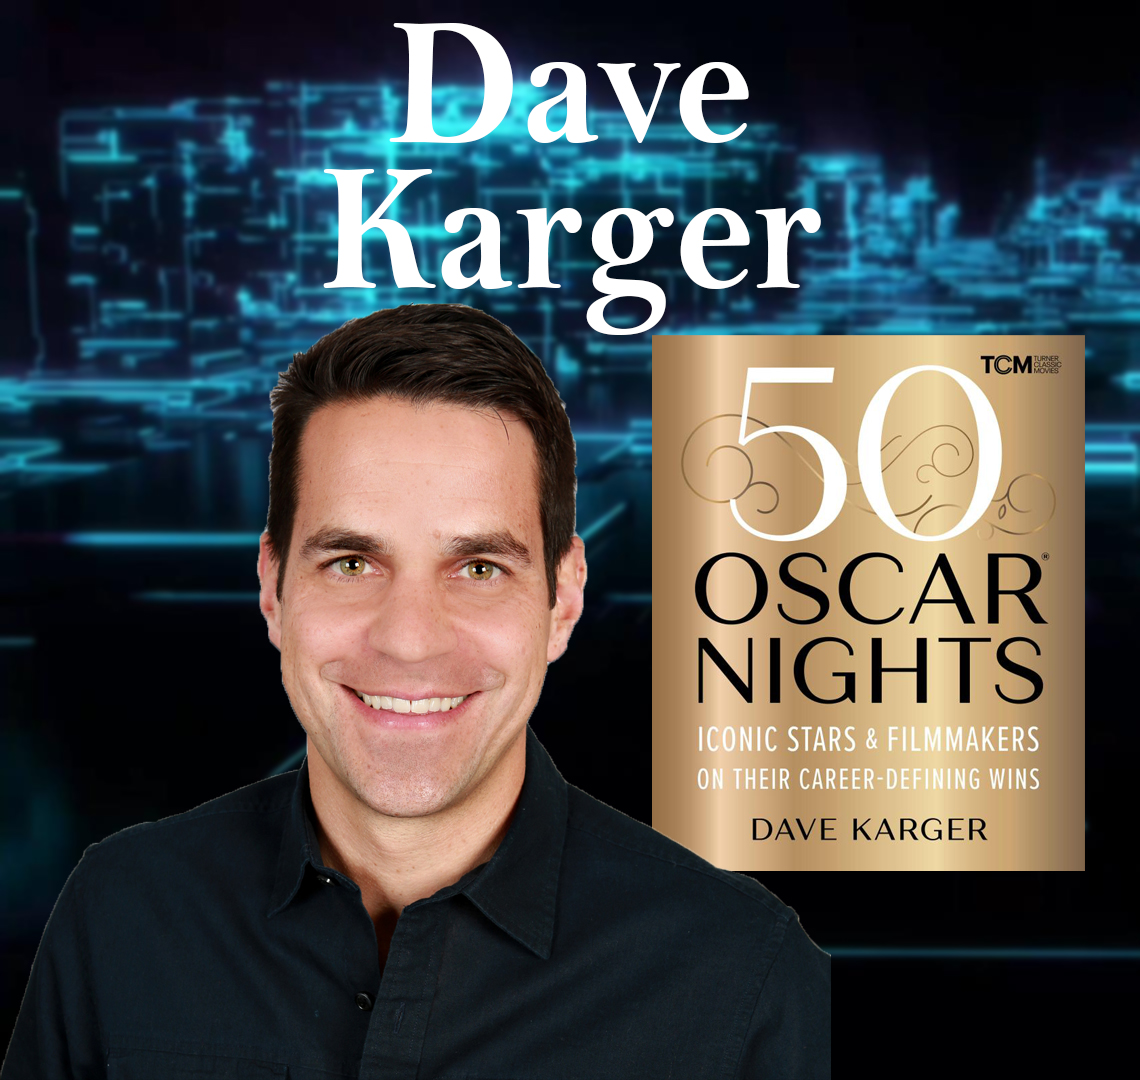 TCM Host, Entertainment Journalist, Author Dave Karger Guests On Harvey Brownstone Interviews